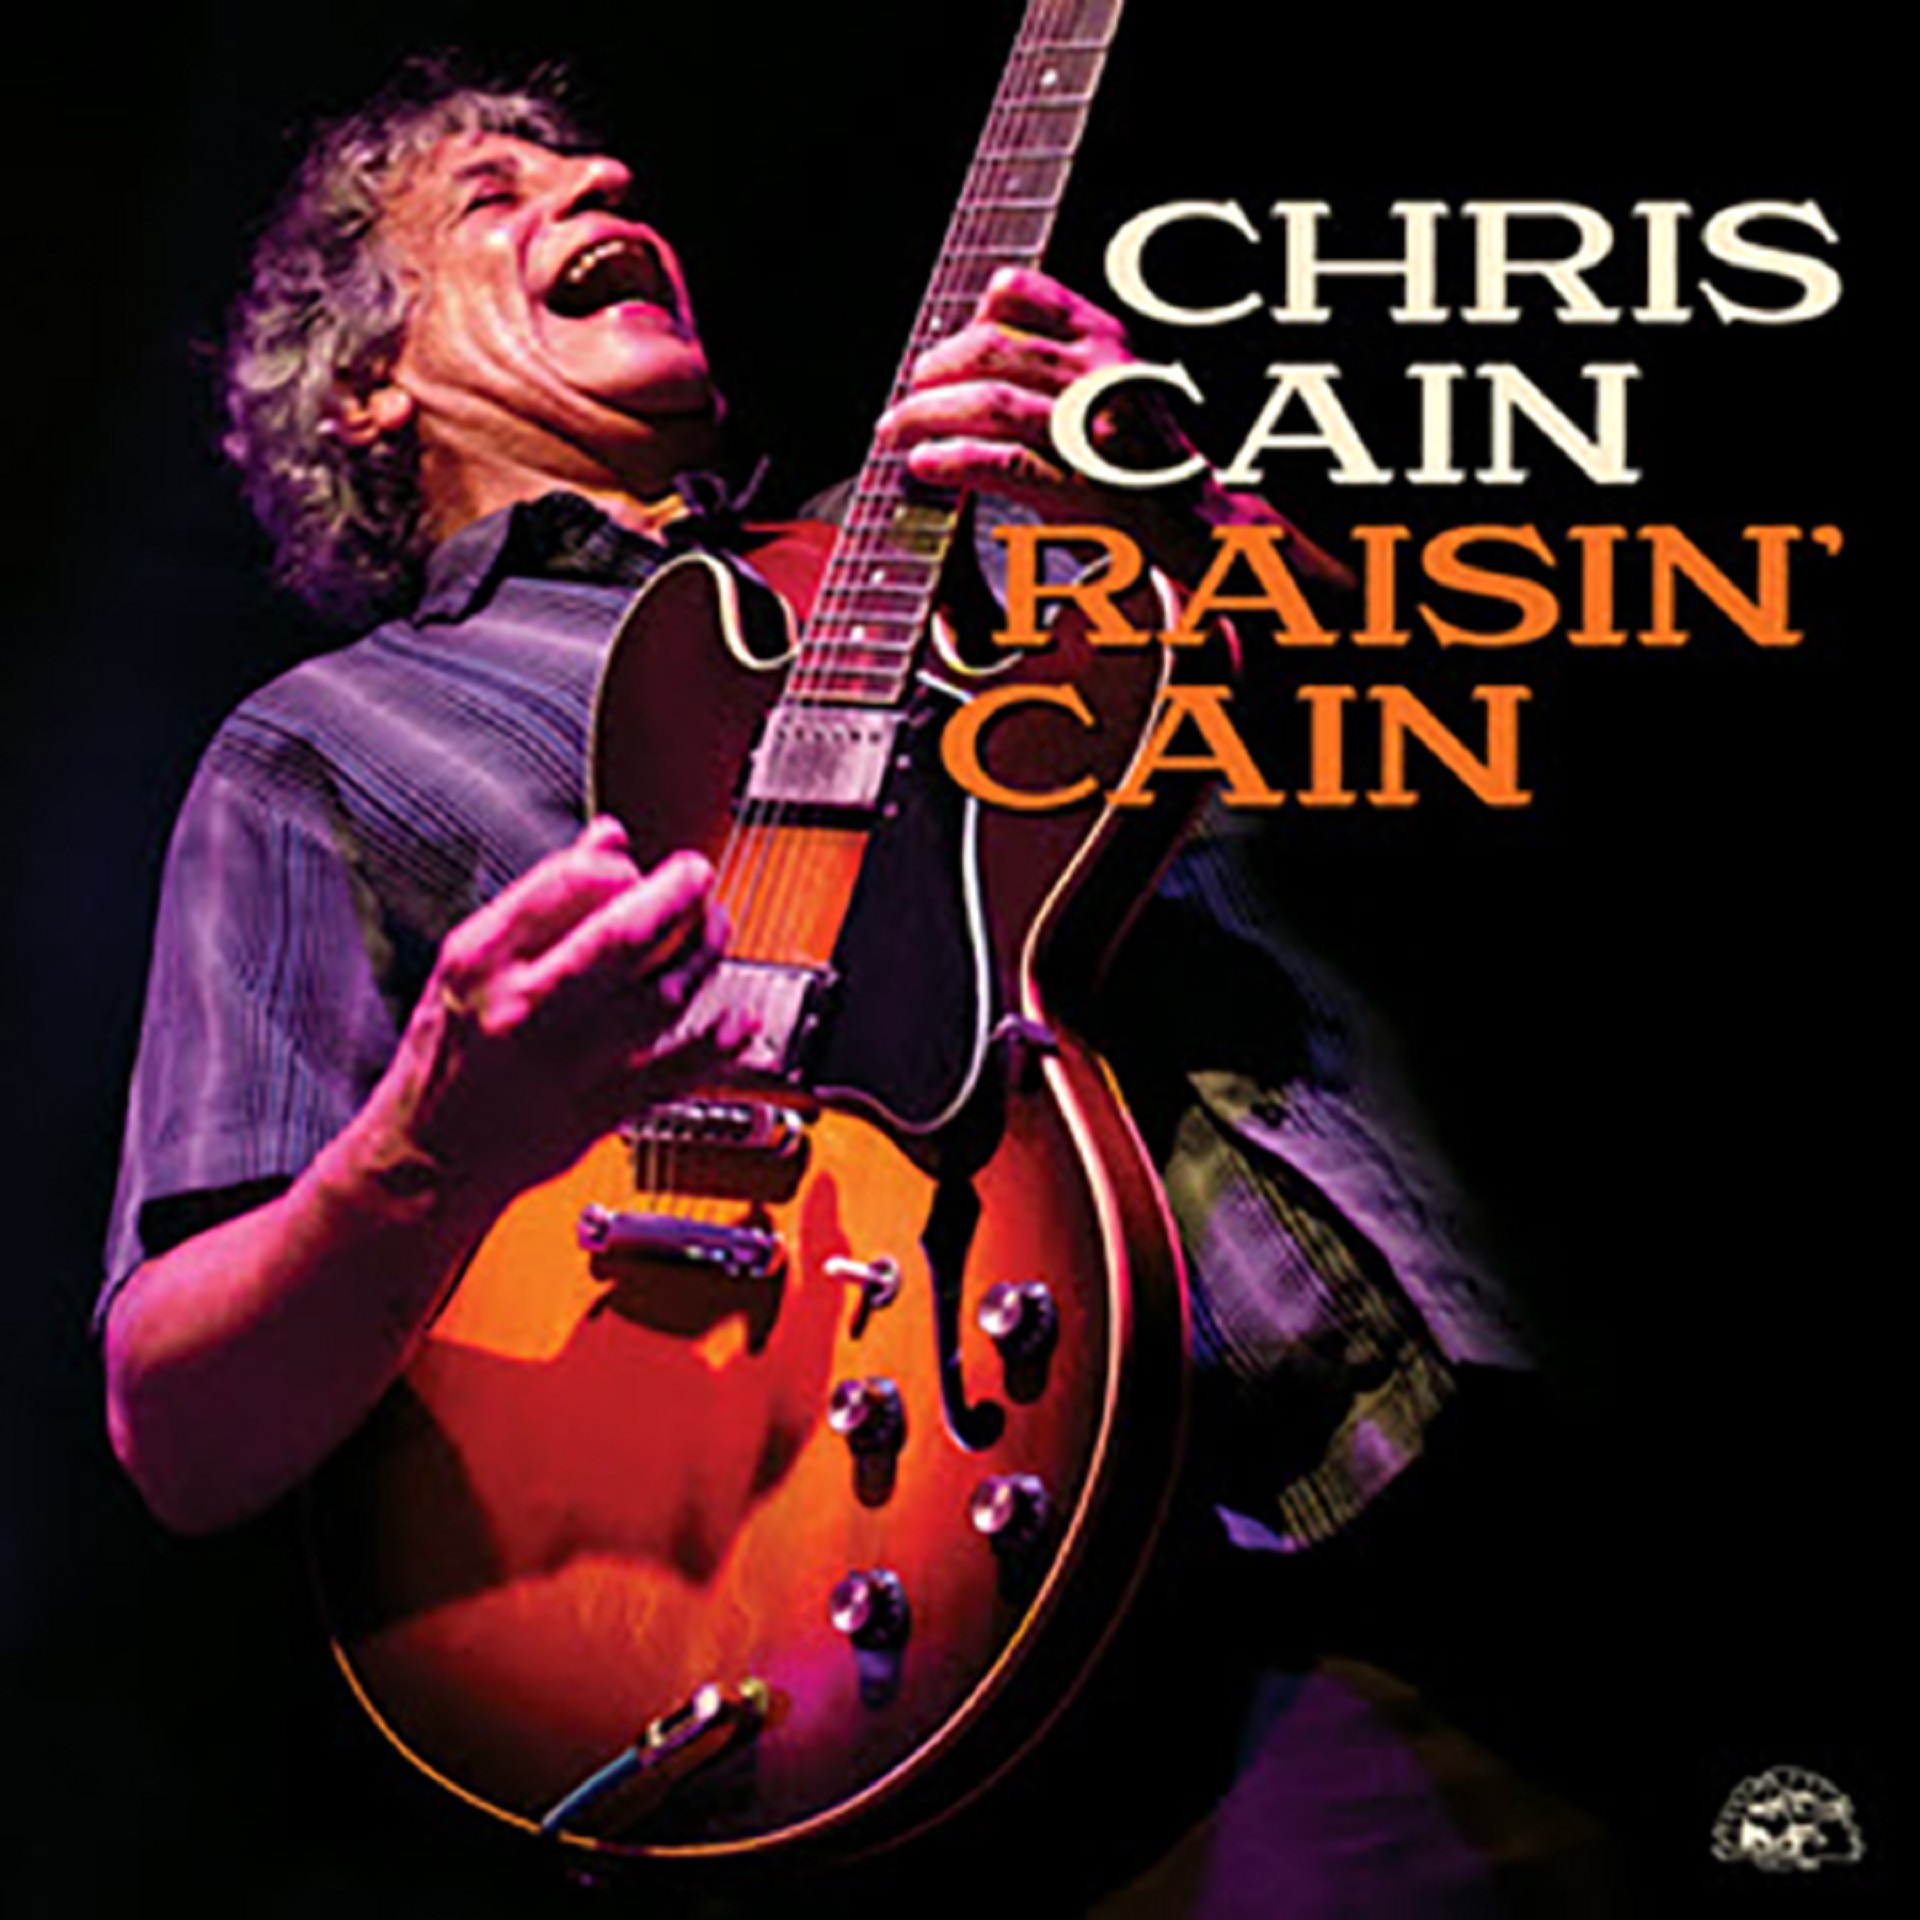 CHRIS CAIN WINS INTERNATIONAL SONGWRITING COMPETITION IN BLUES FOR I BELIEVE I GOT OFF CHEAP